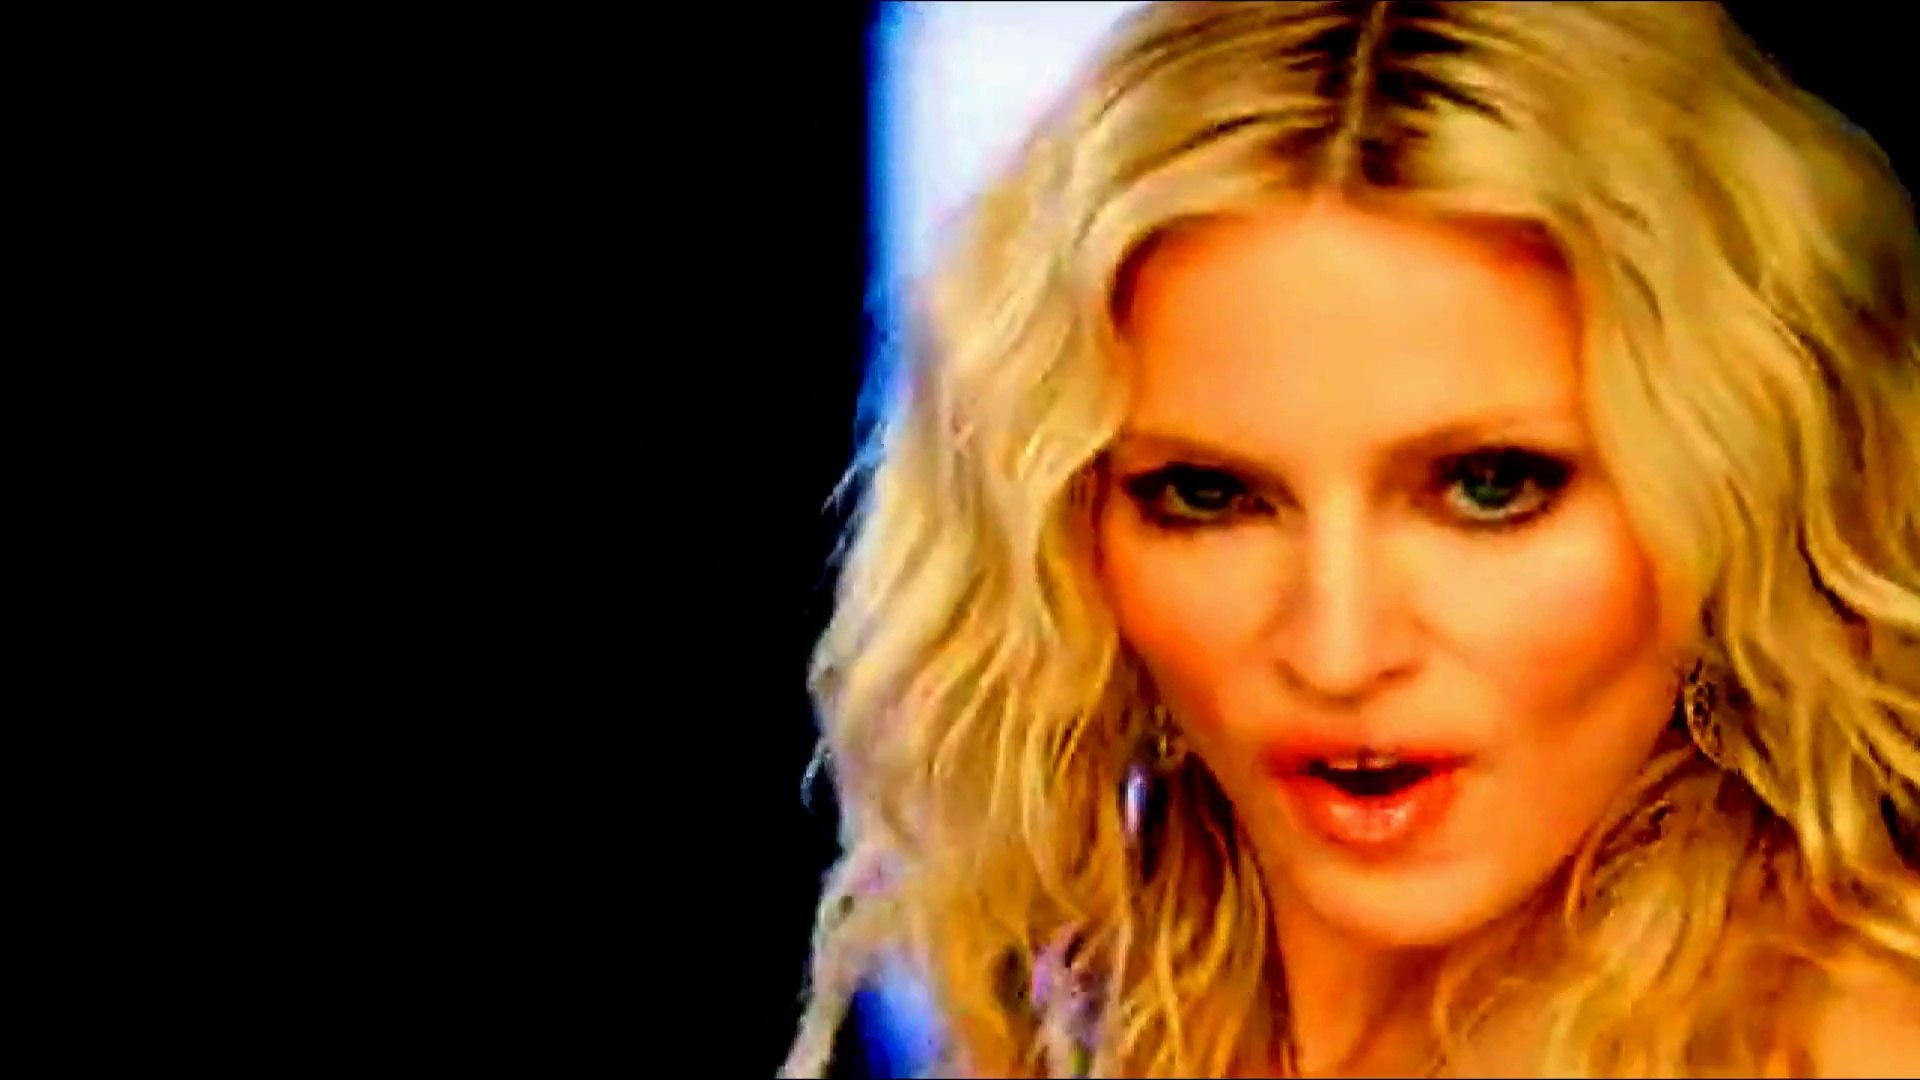 Madonna - 4 Minutes (Featuring Justin Timberlake And Timbaland) [OFFICIAL MUSIC VIDEO]